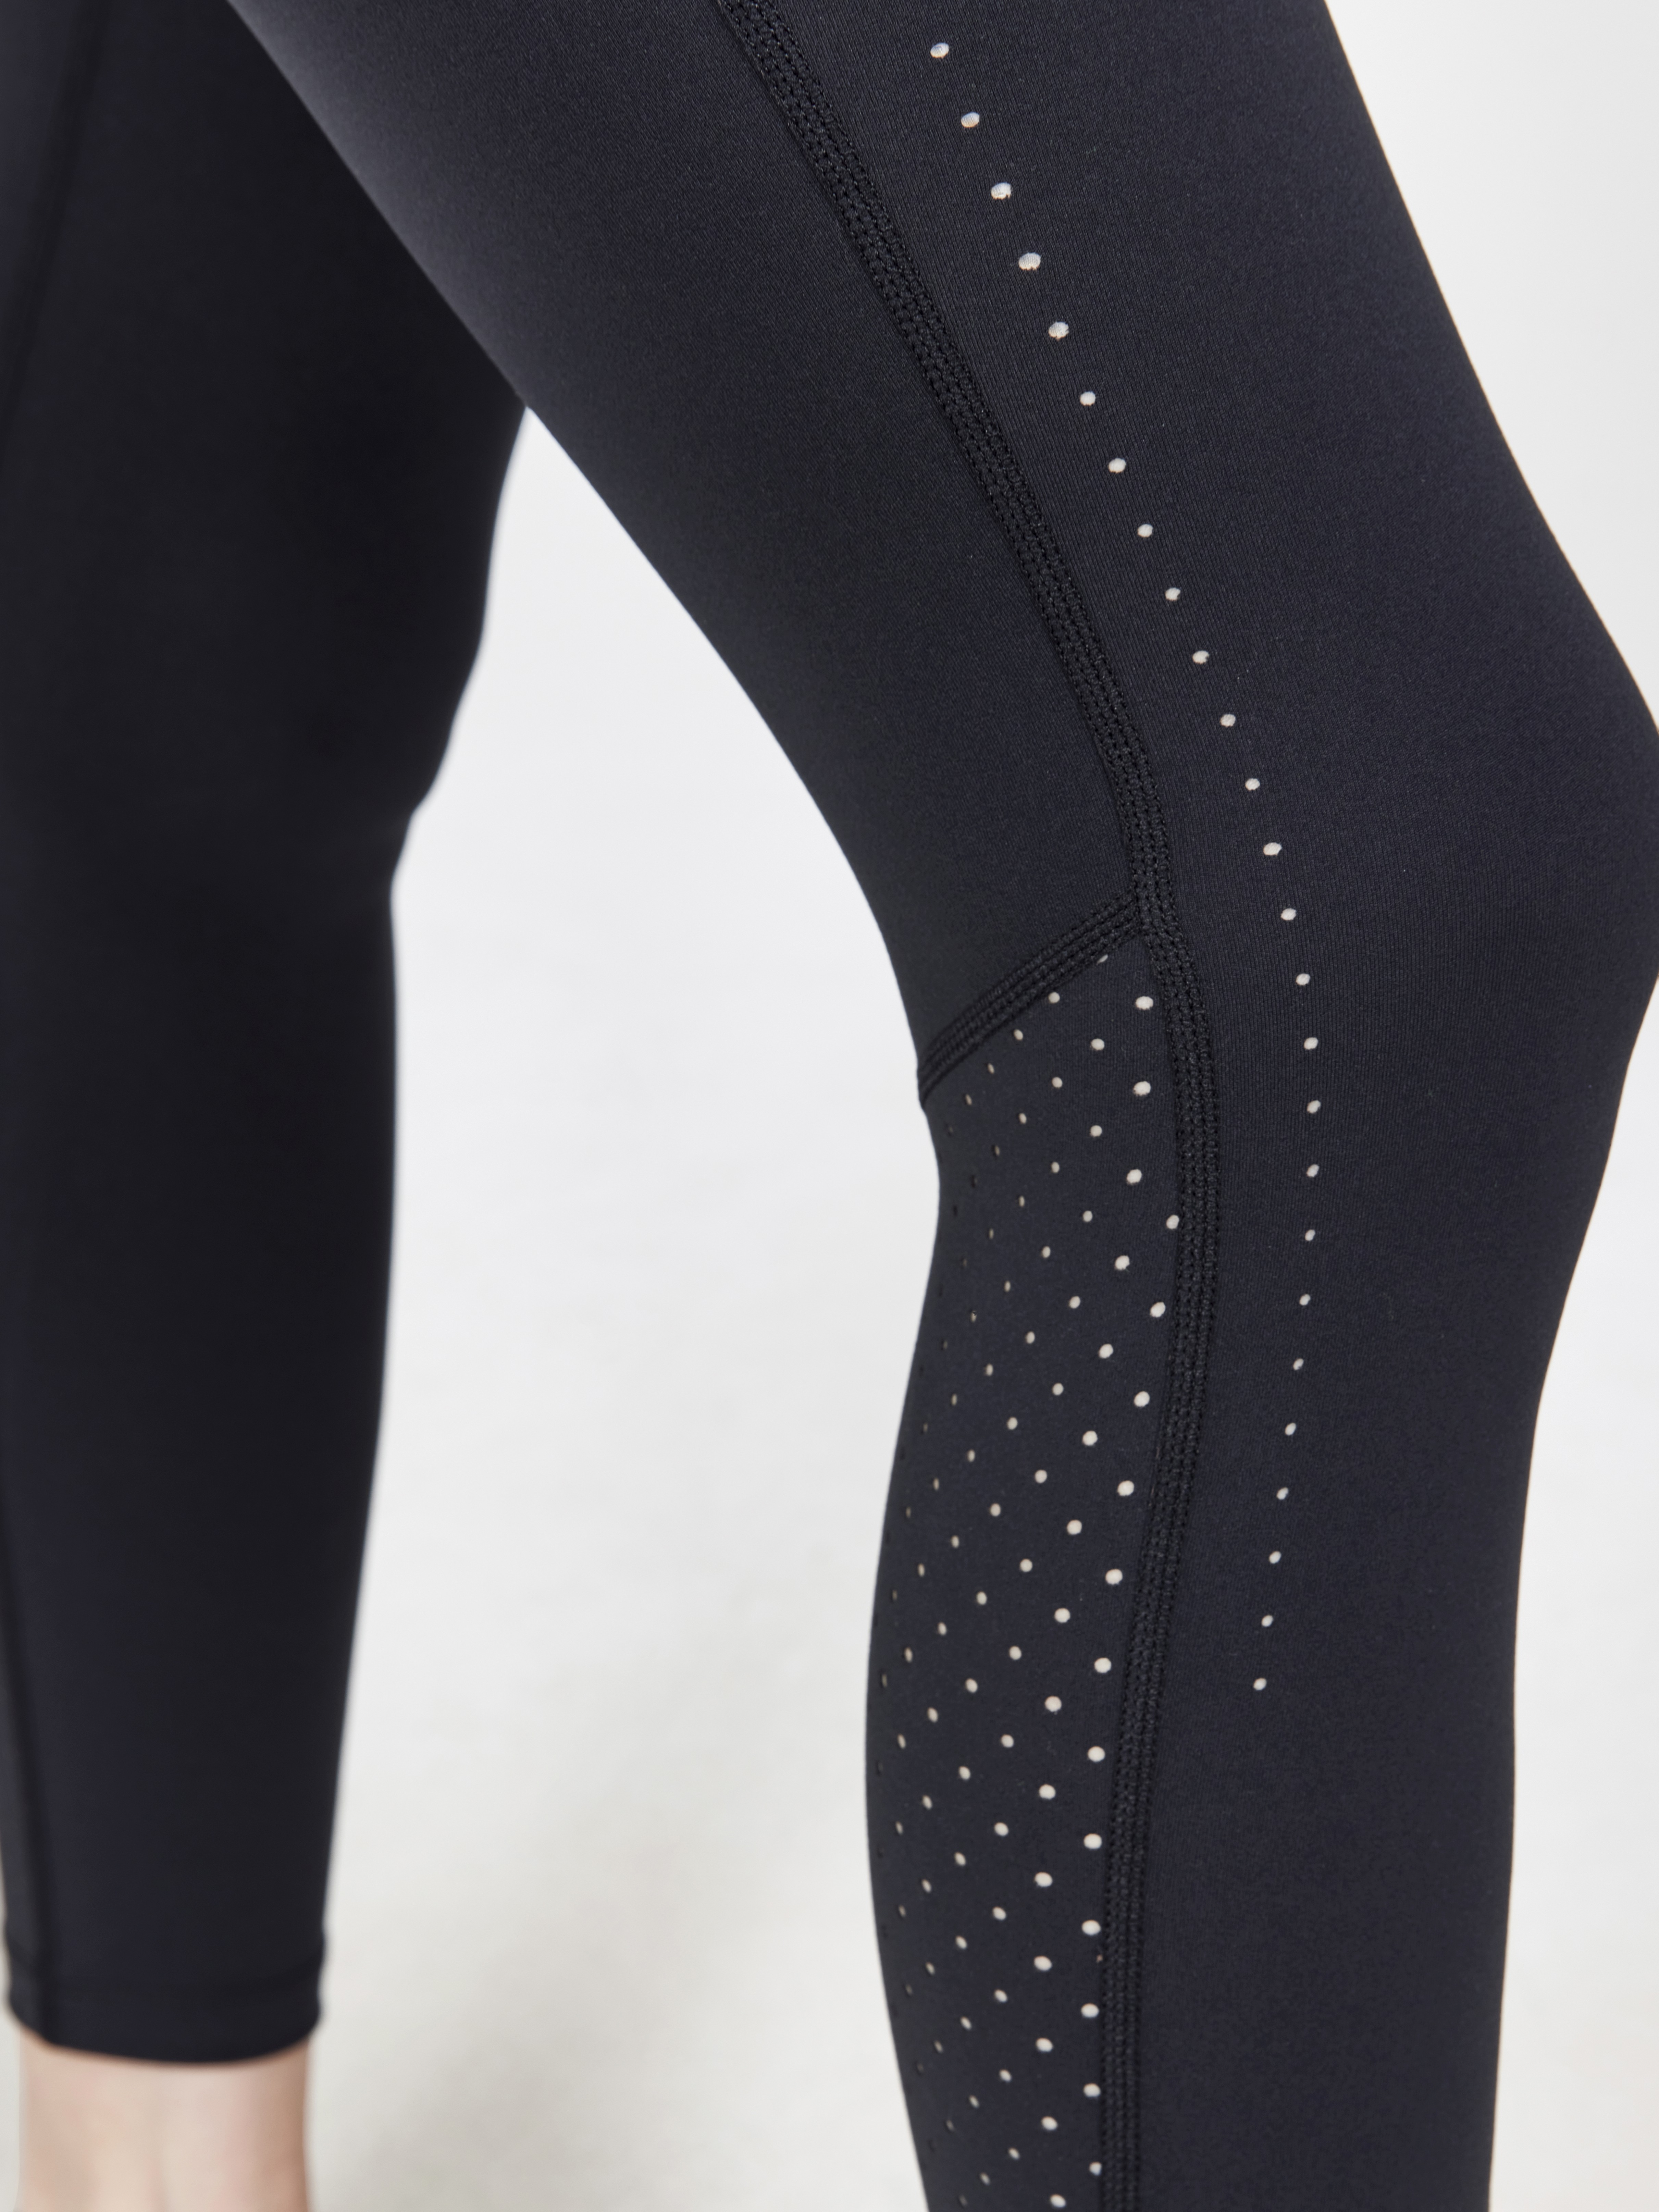 Recycled Perforated Leggings - FINAL SALE